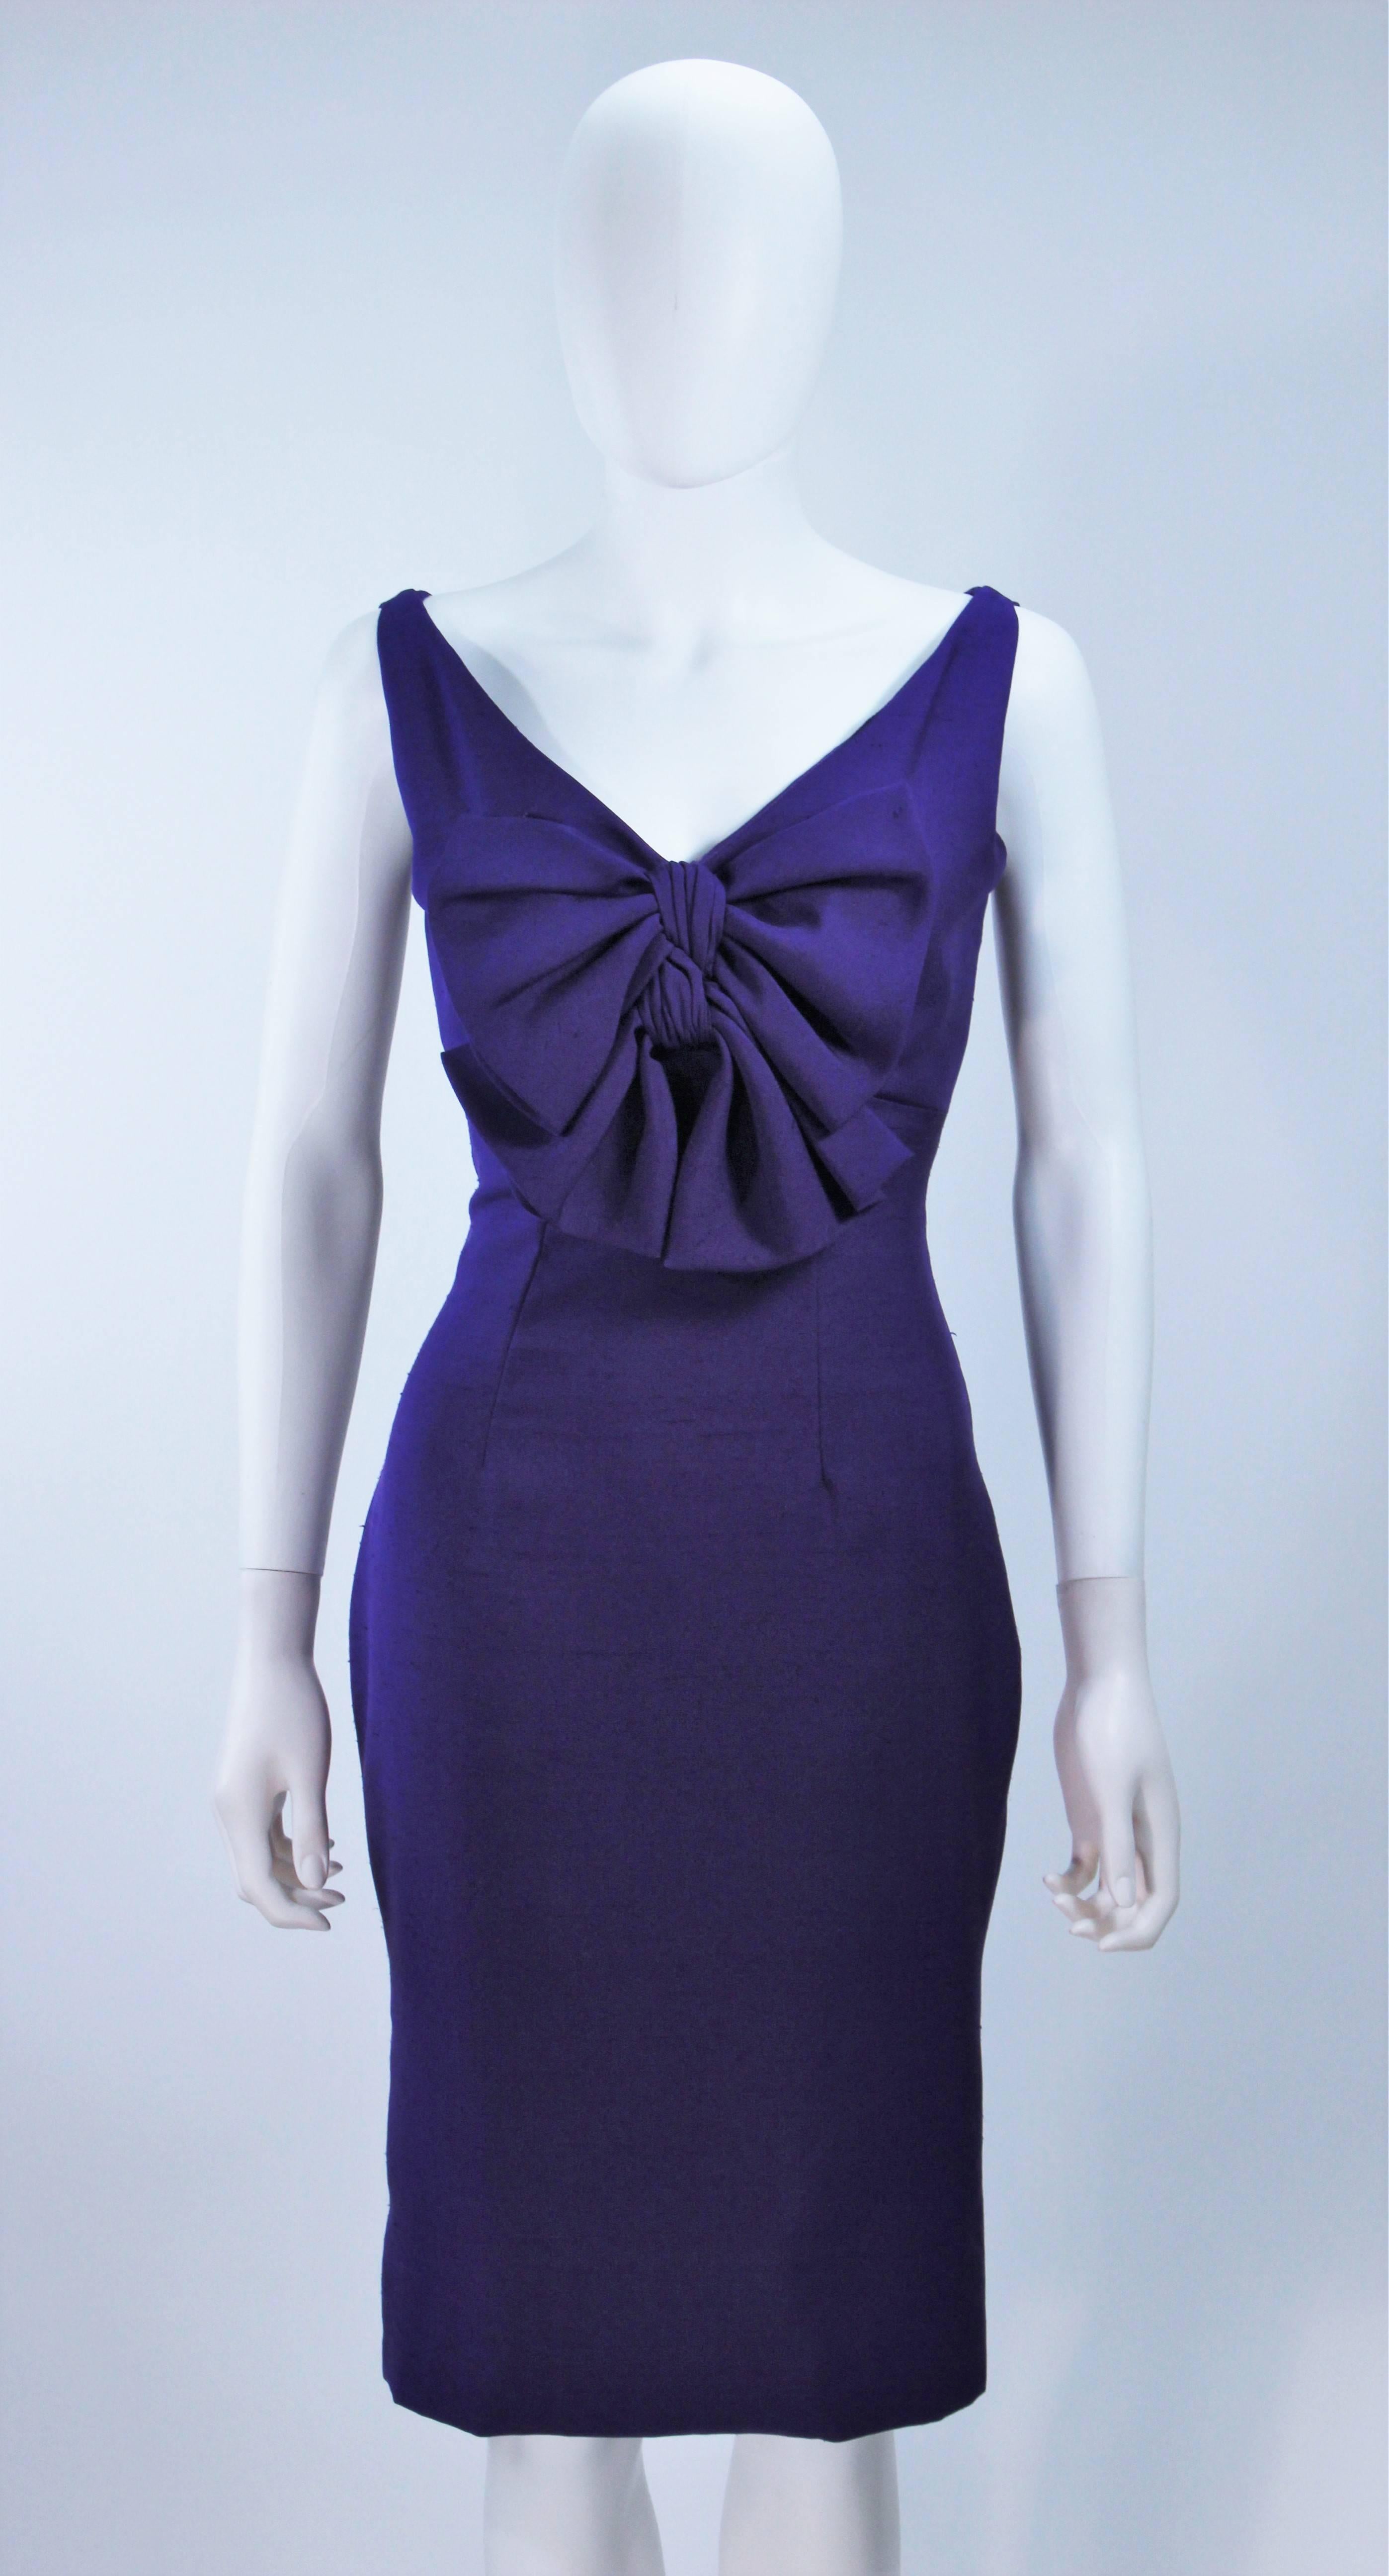 Black ELIZABETH MASON COUTURE Purple Silk Cocktail Dress with Bow Made to Order For Sale